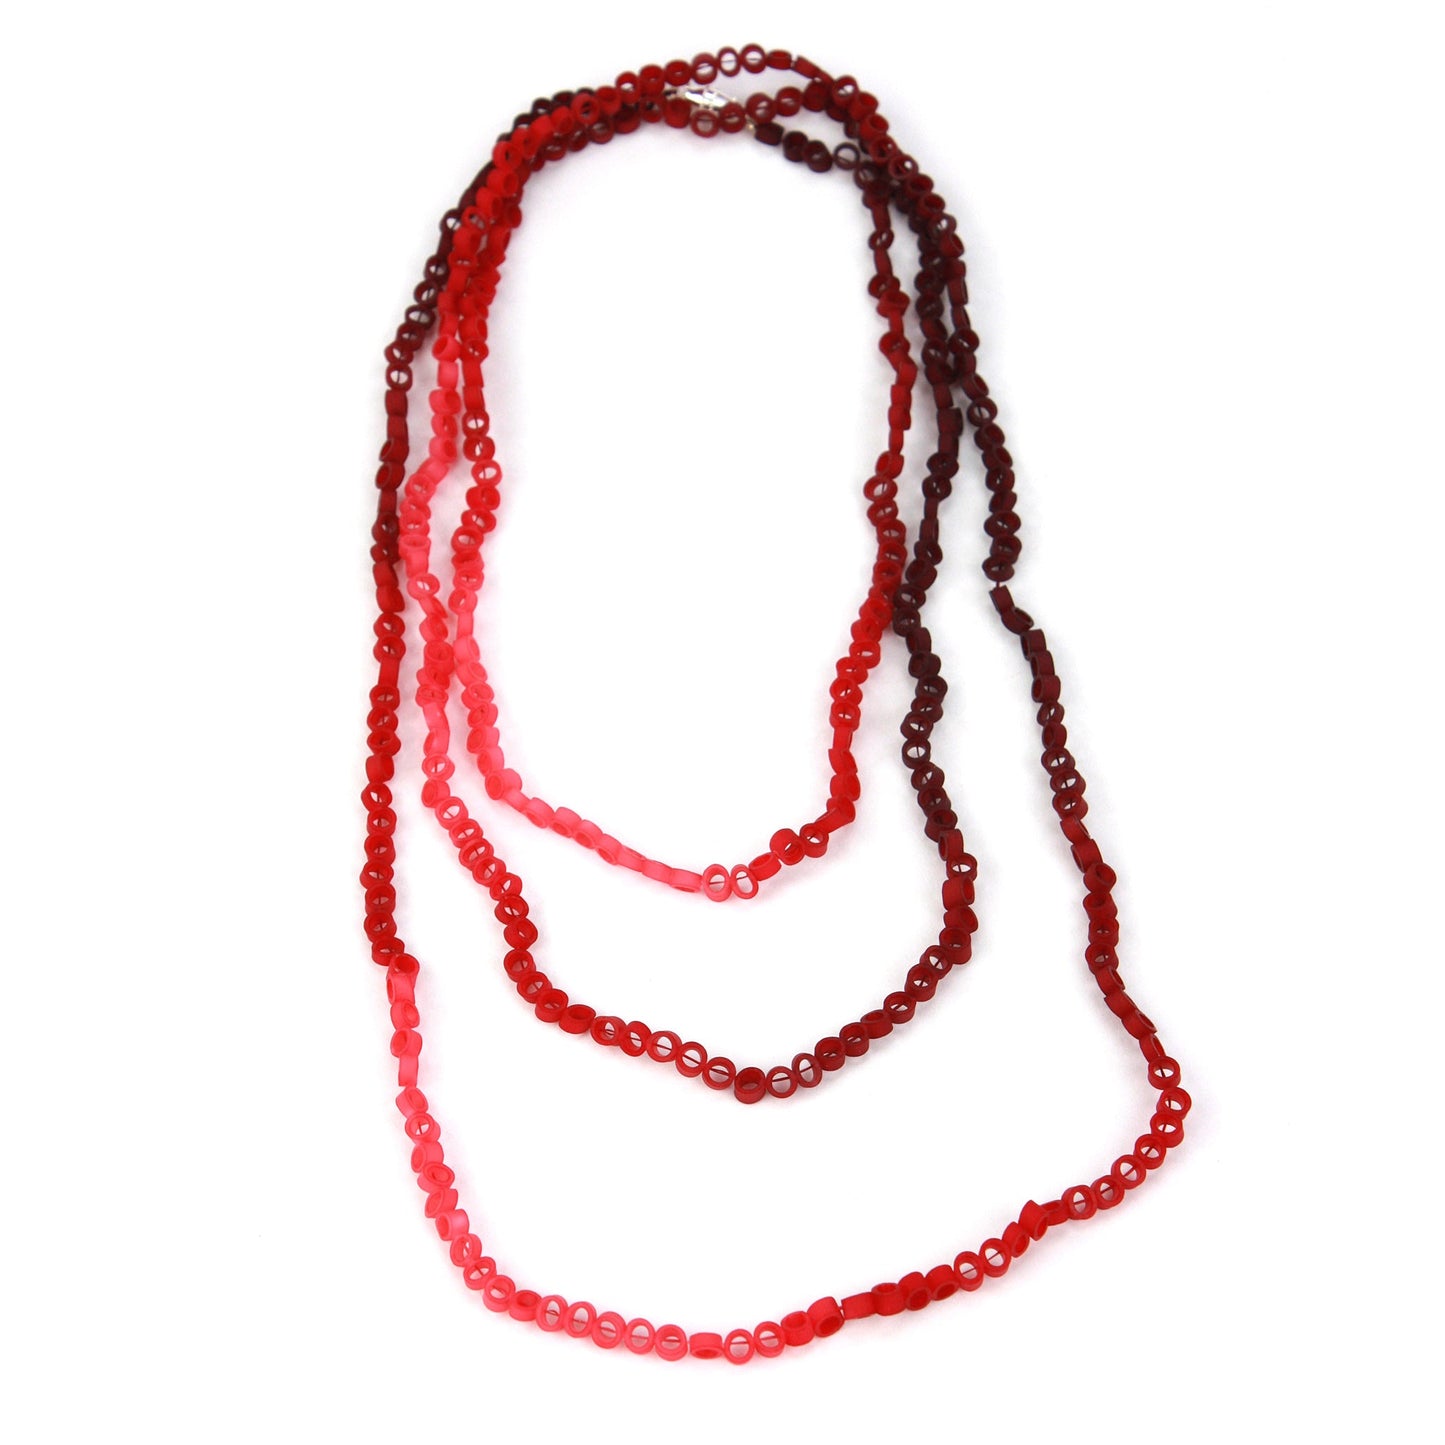 Little links necklace - Reds